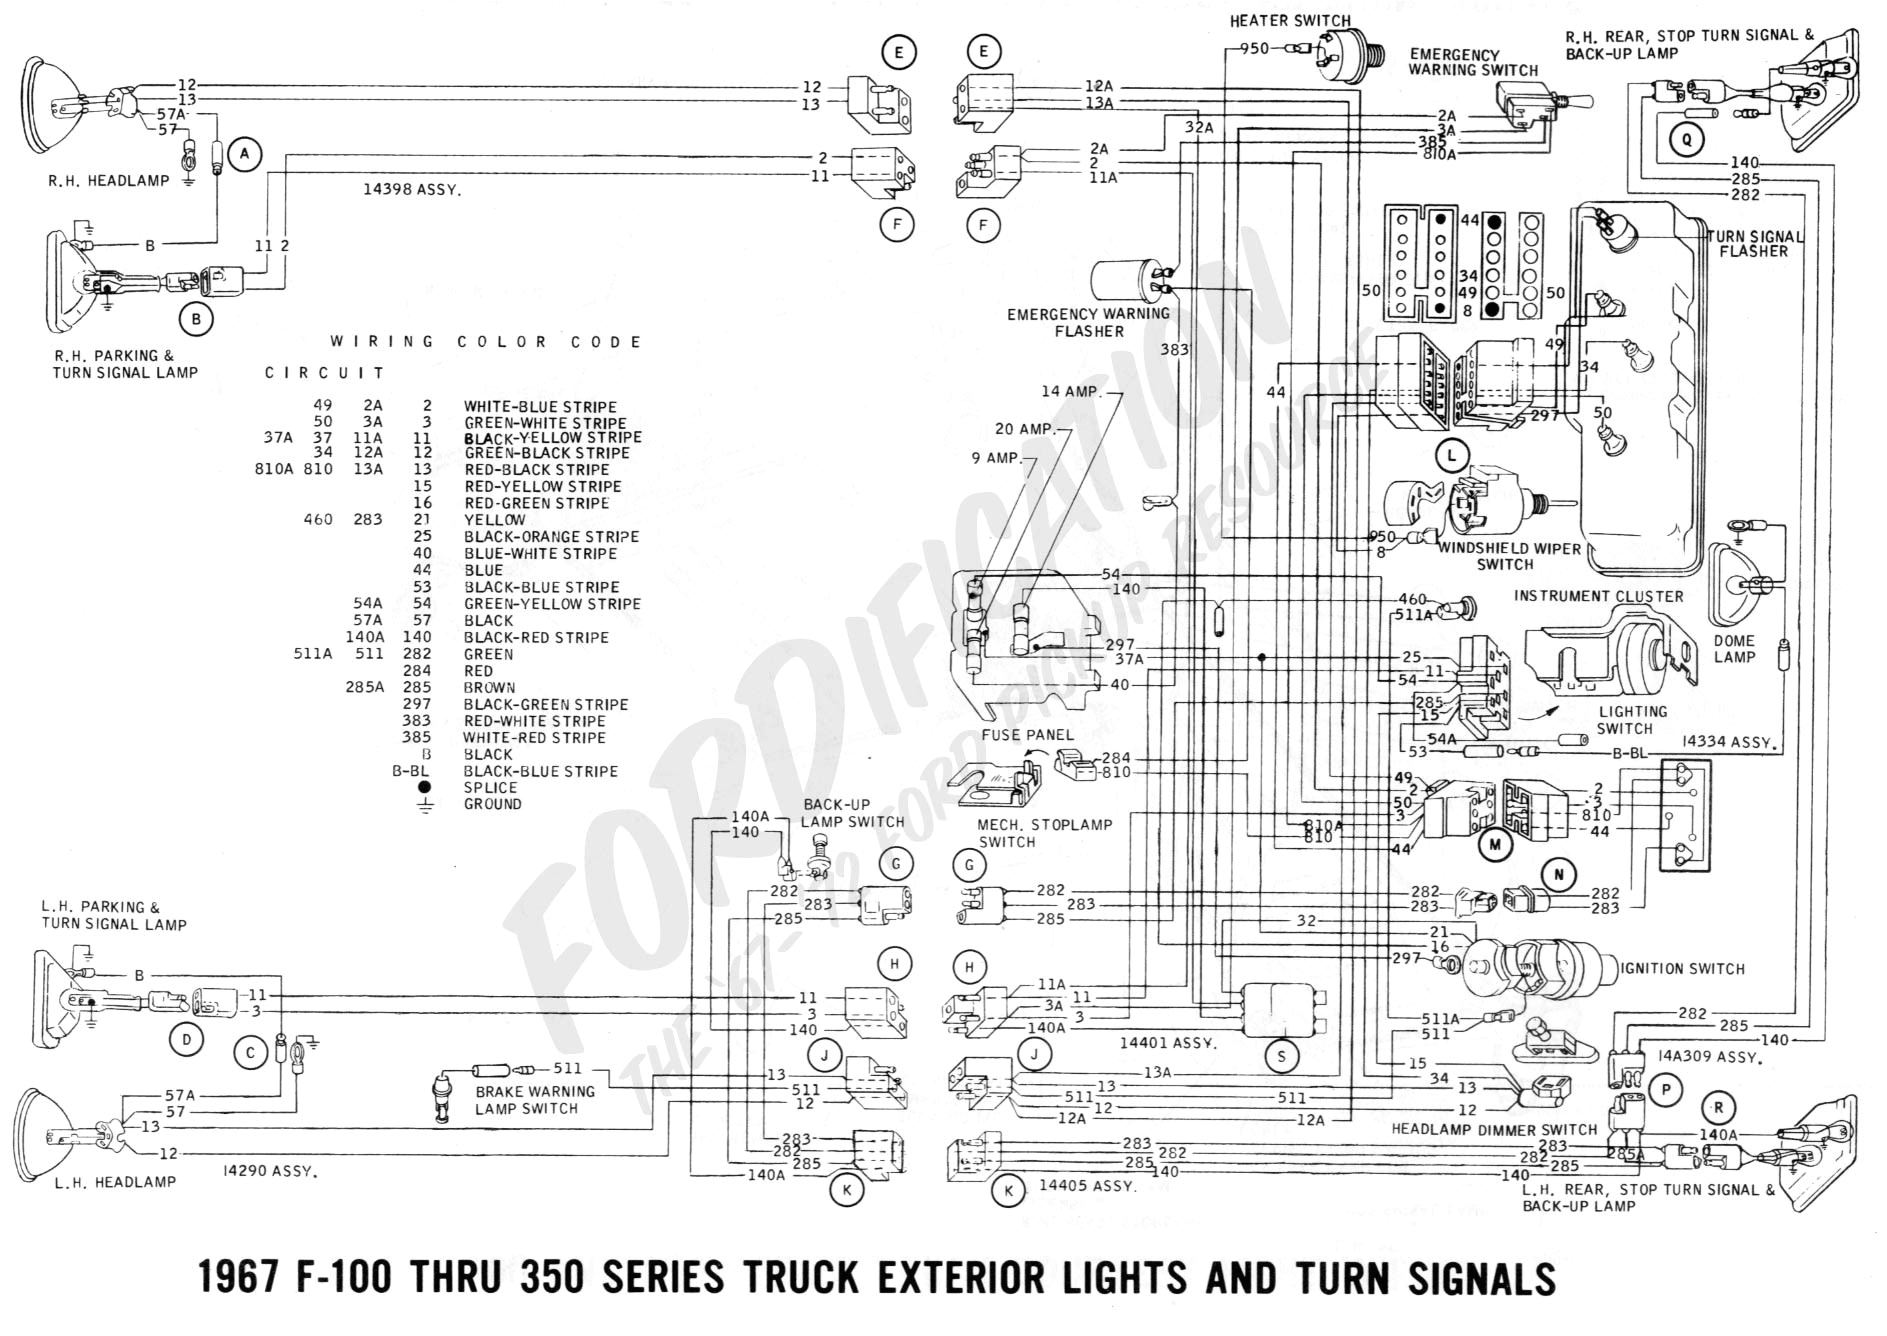 wiring diagram wwwfordificationcom tech schematicsihtm data wiring diagram online ford truck technical drawings and schematics